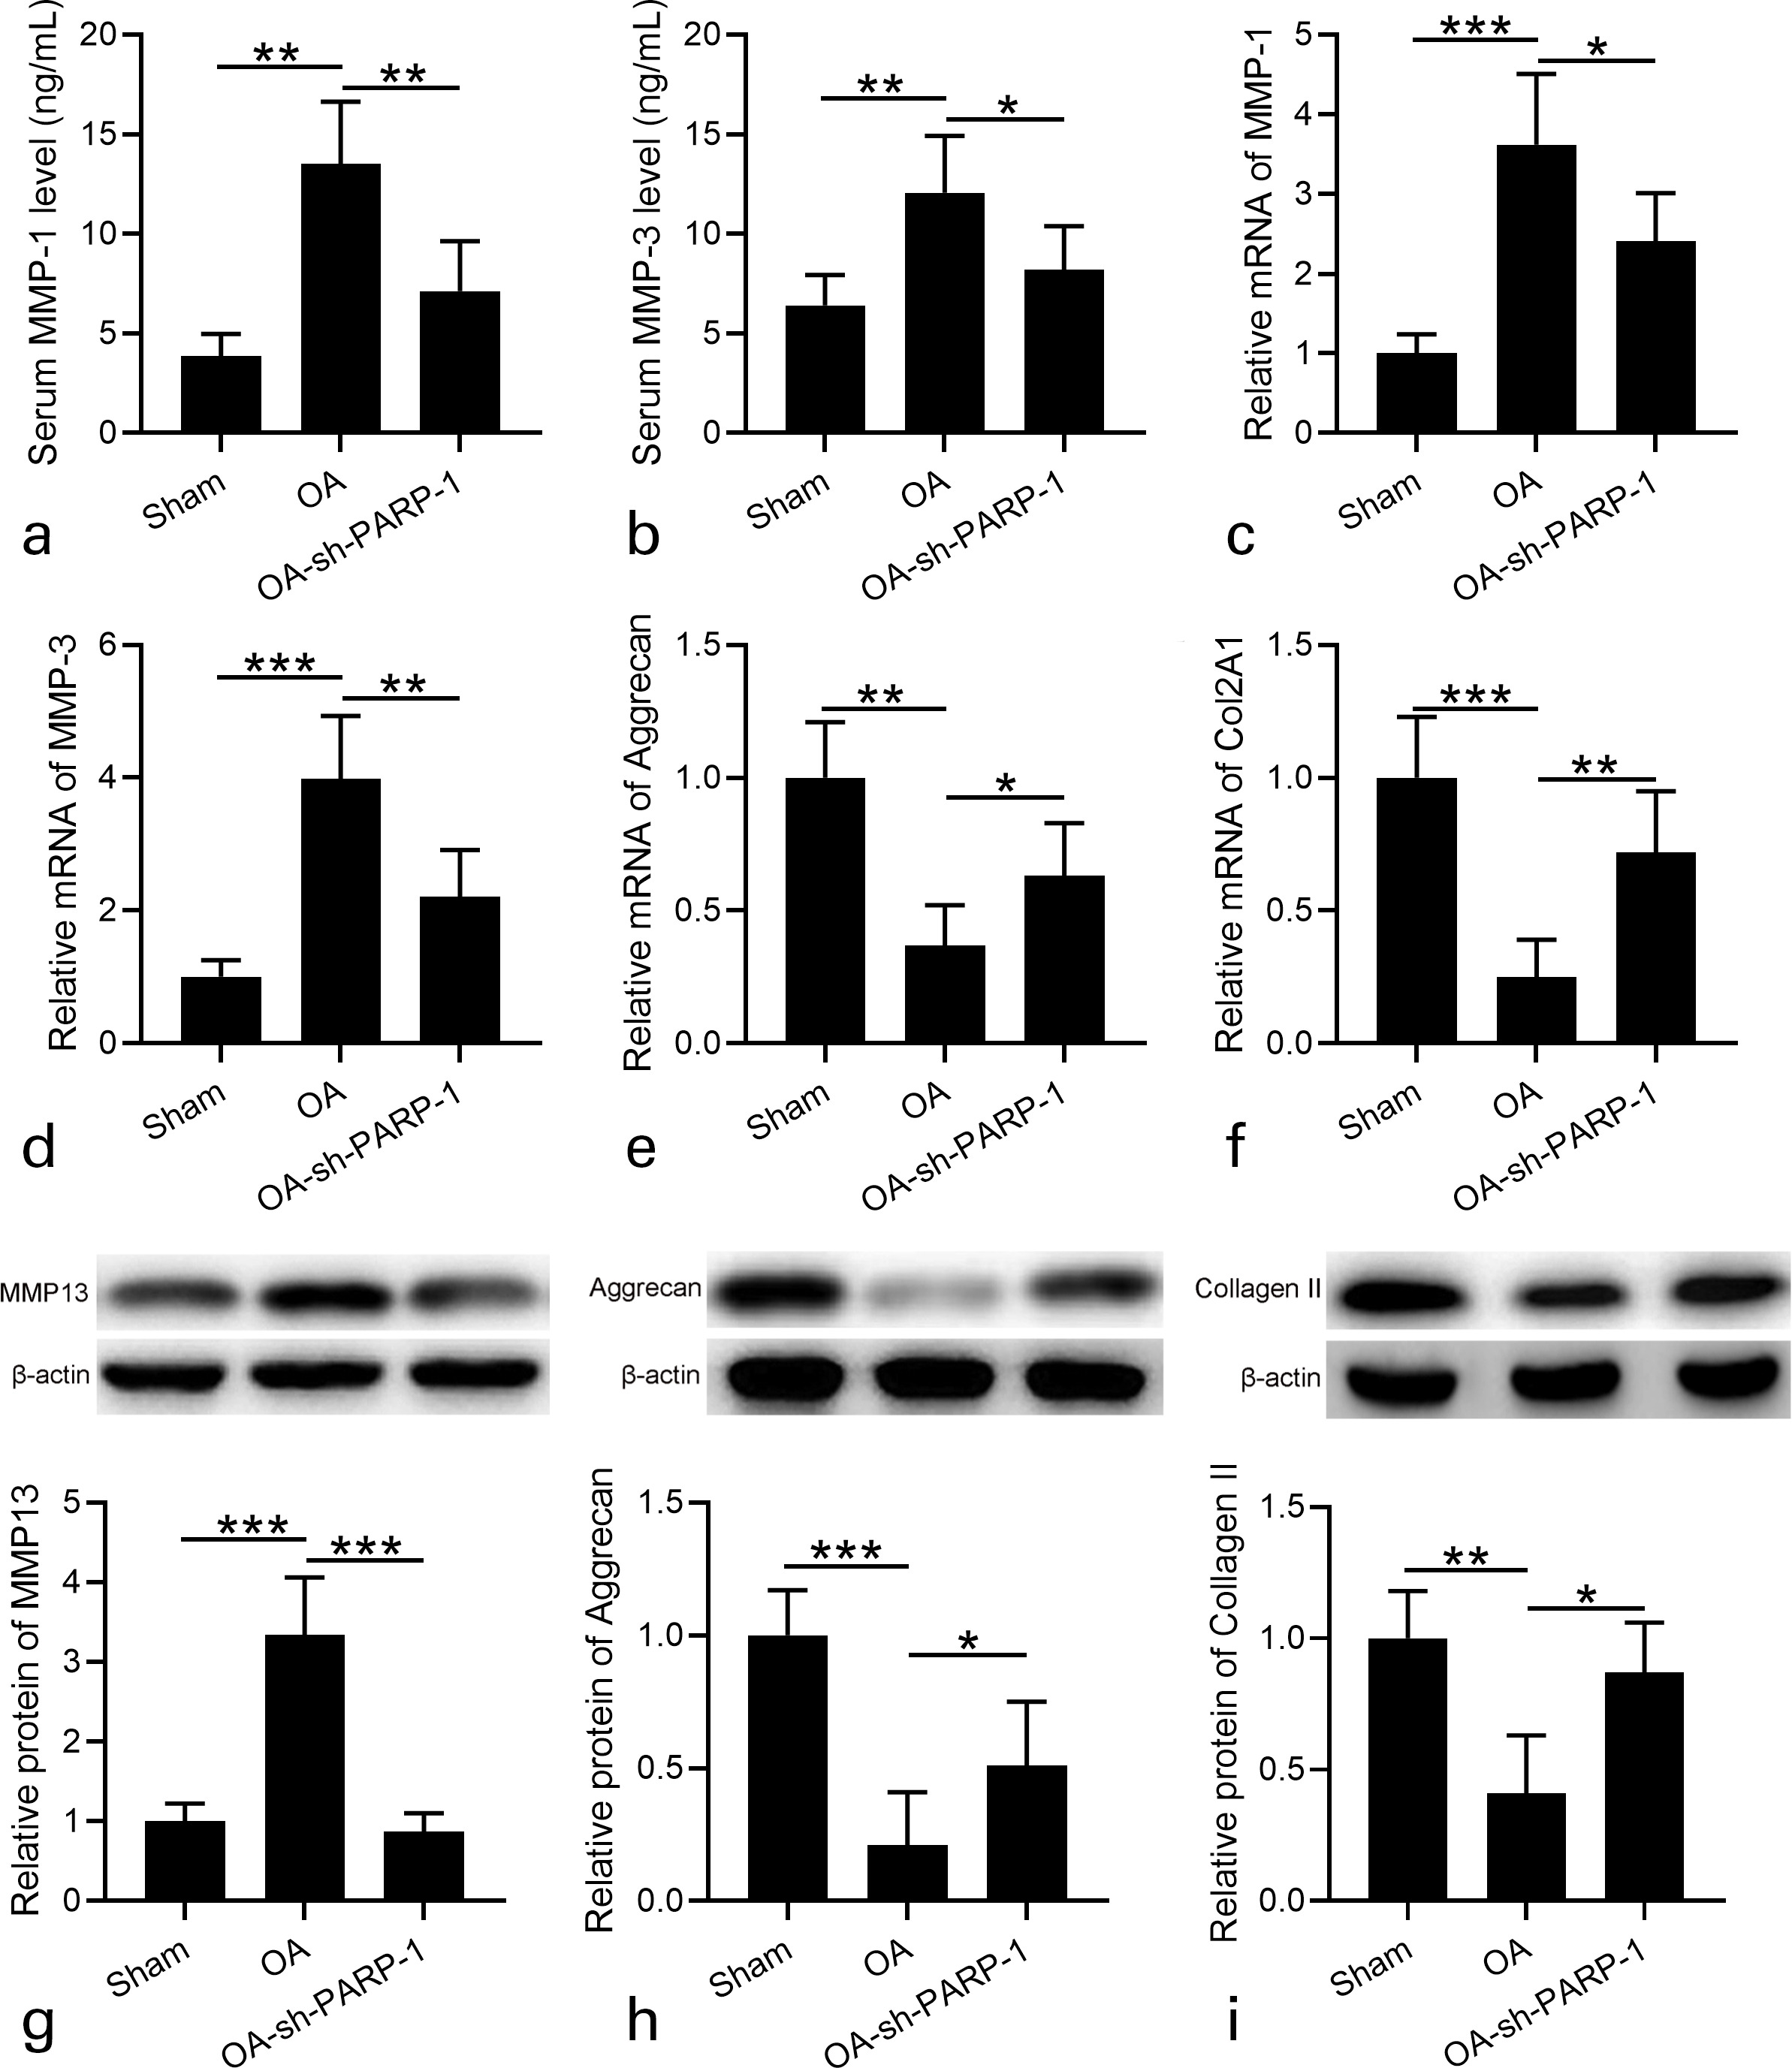 Fig. 4 
            Effects of intra-articular injection of poly (ADP-ribose) polymerase 1 (PARP-1) shRNA (short hairpin (sh)-PARP-1) on the expression of cartilage matrix catabolic enzymes in the cartilage and ameliorated osteoarthritis (OA) cartilage degradation in rats 12 weeks after anterior cruciate ligament transection (ACLT) plus medial meniscus removal (MMx). a) and b) Serum matrix metalloproteinase (MMP)-1 and MMP-3 were measured by enzyme-linked immunosorbent assay (ELISA). c) and d) Real-time quantitative reverse transcription polymerase chain reaction (RT-qPCR) was used to analyze the messenger RNA (mRNA) expression levels of MMP-1 and MMP-3 in cartilage. Relative expression was normalized to sham group. e) and f) RT-qPCR was used to analyze the mRNA expression levels of aggrecan and collagen type II alpha 1 chain (Col2A1) in cartilage. Relative expression was normalized to sham group. g) to i) Western blotting was used to assay the protein expression of g) MMP-13, h) aggrecan, and i) type II collagen in cartilage. Relative expression was normalized to sham group. N = 12 in each group. Data are presented as mean (standard deviation (SD)). *p < 0.05, **p < 0.01, ***p < 0.001 between the indicated groups. One-way analysis of variance (ANOVA) followed by Dunn's multiple comparisons test.
          